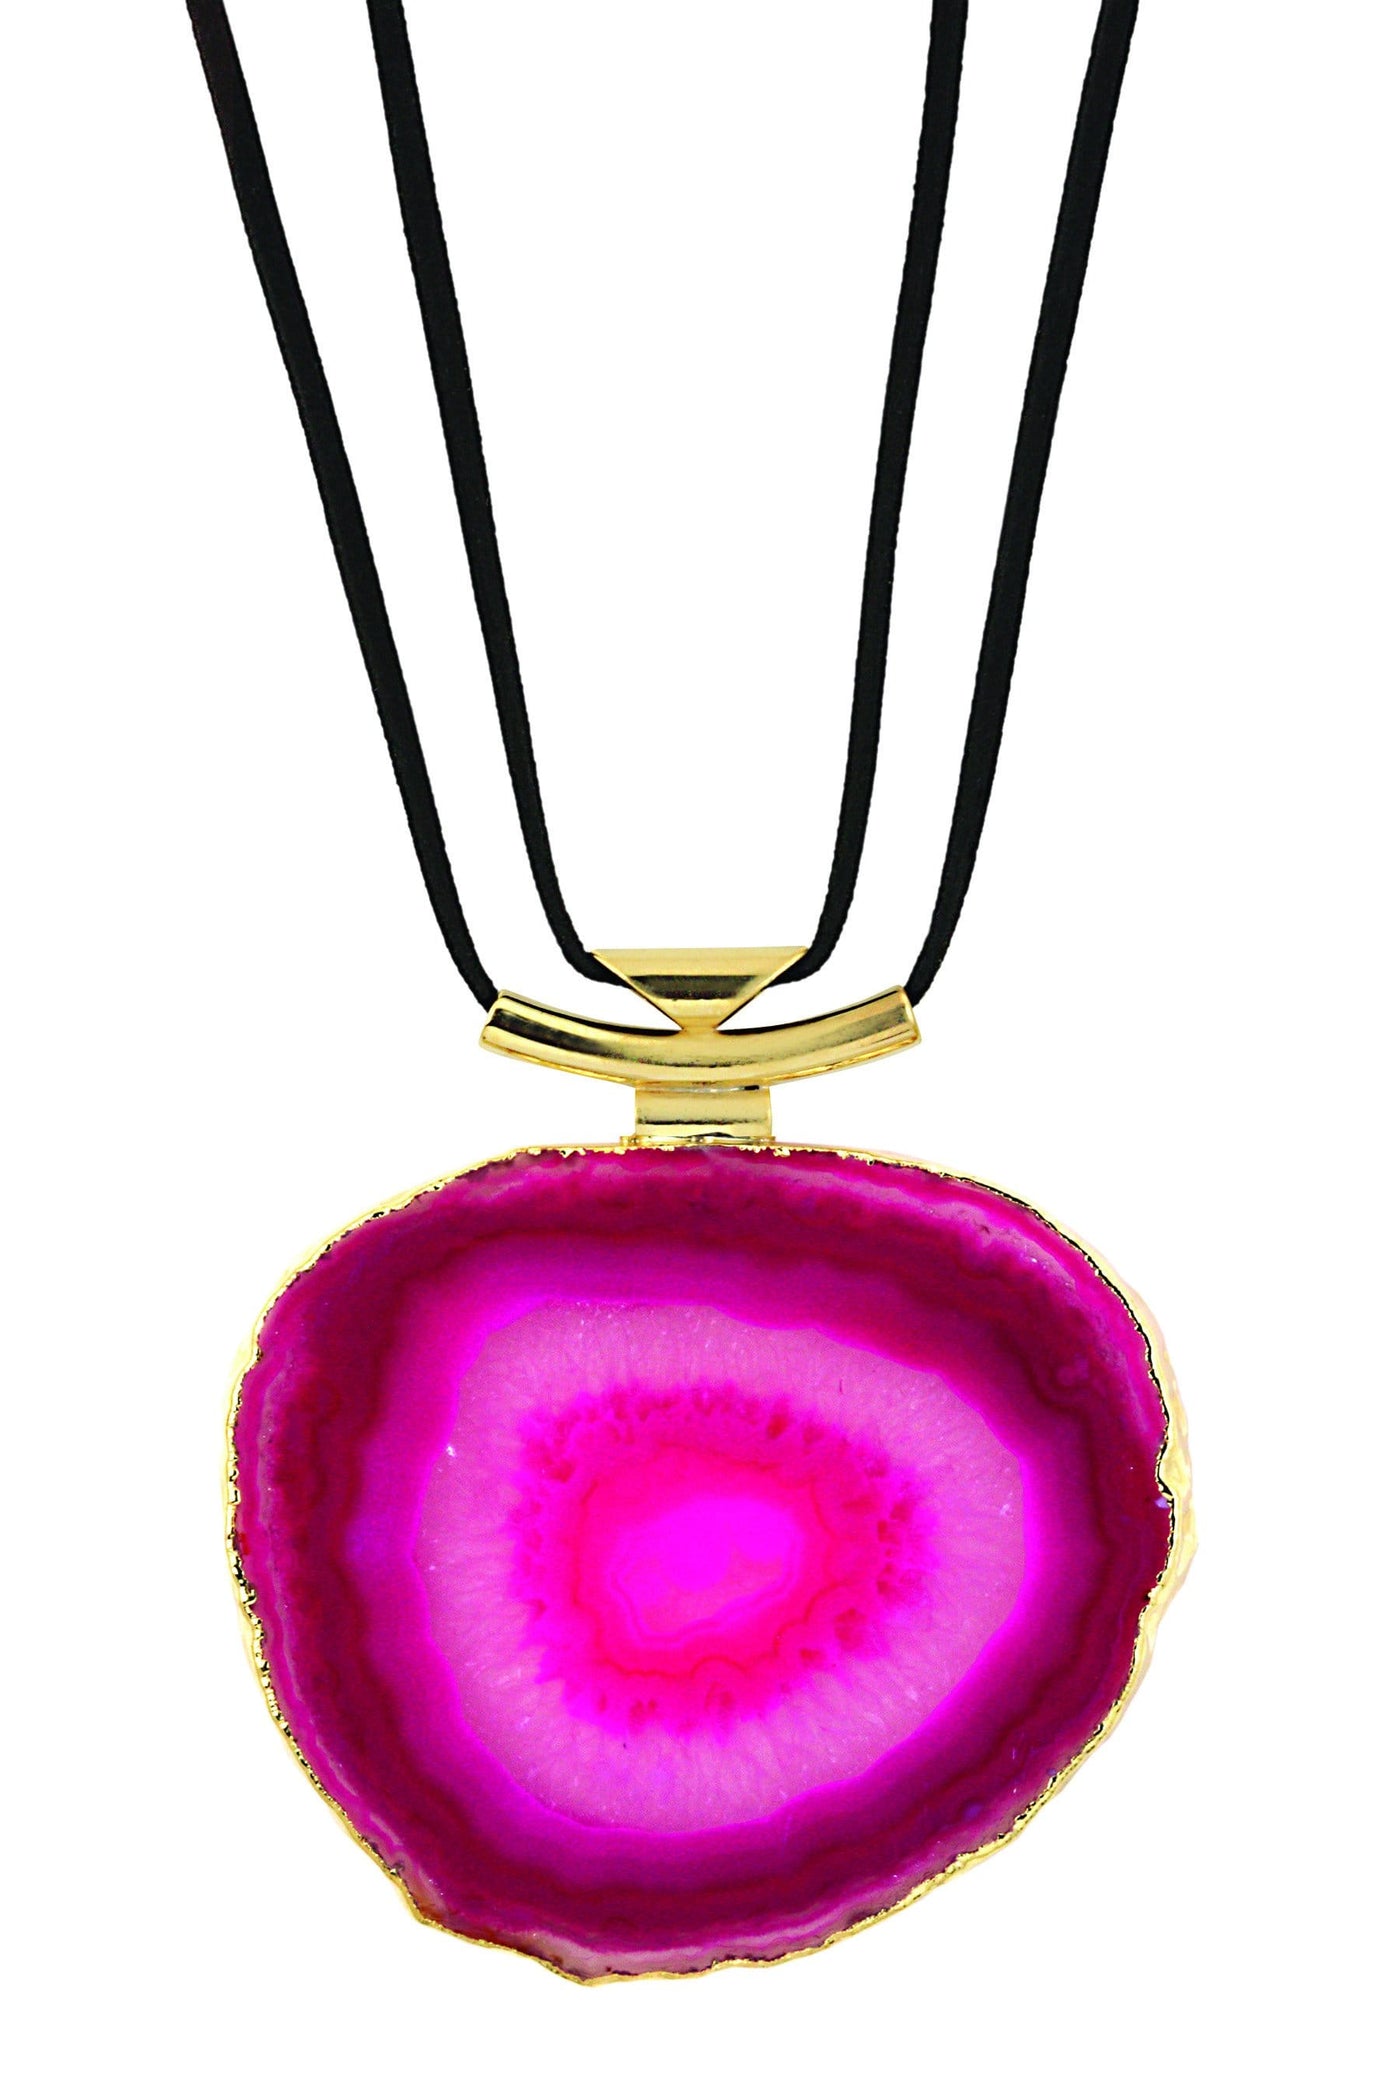 A pink agate necklace with black leather cord and gold bail with a white background.